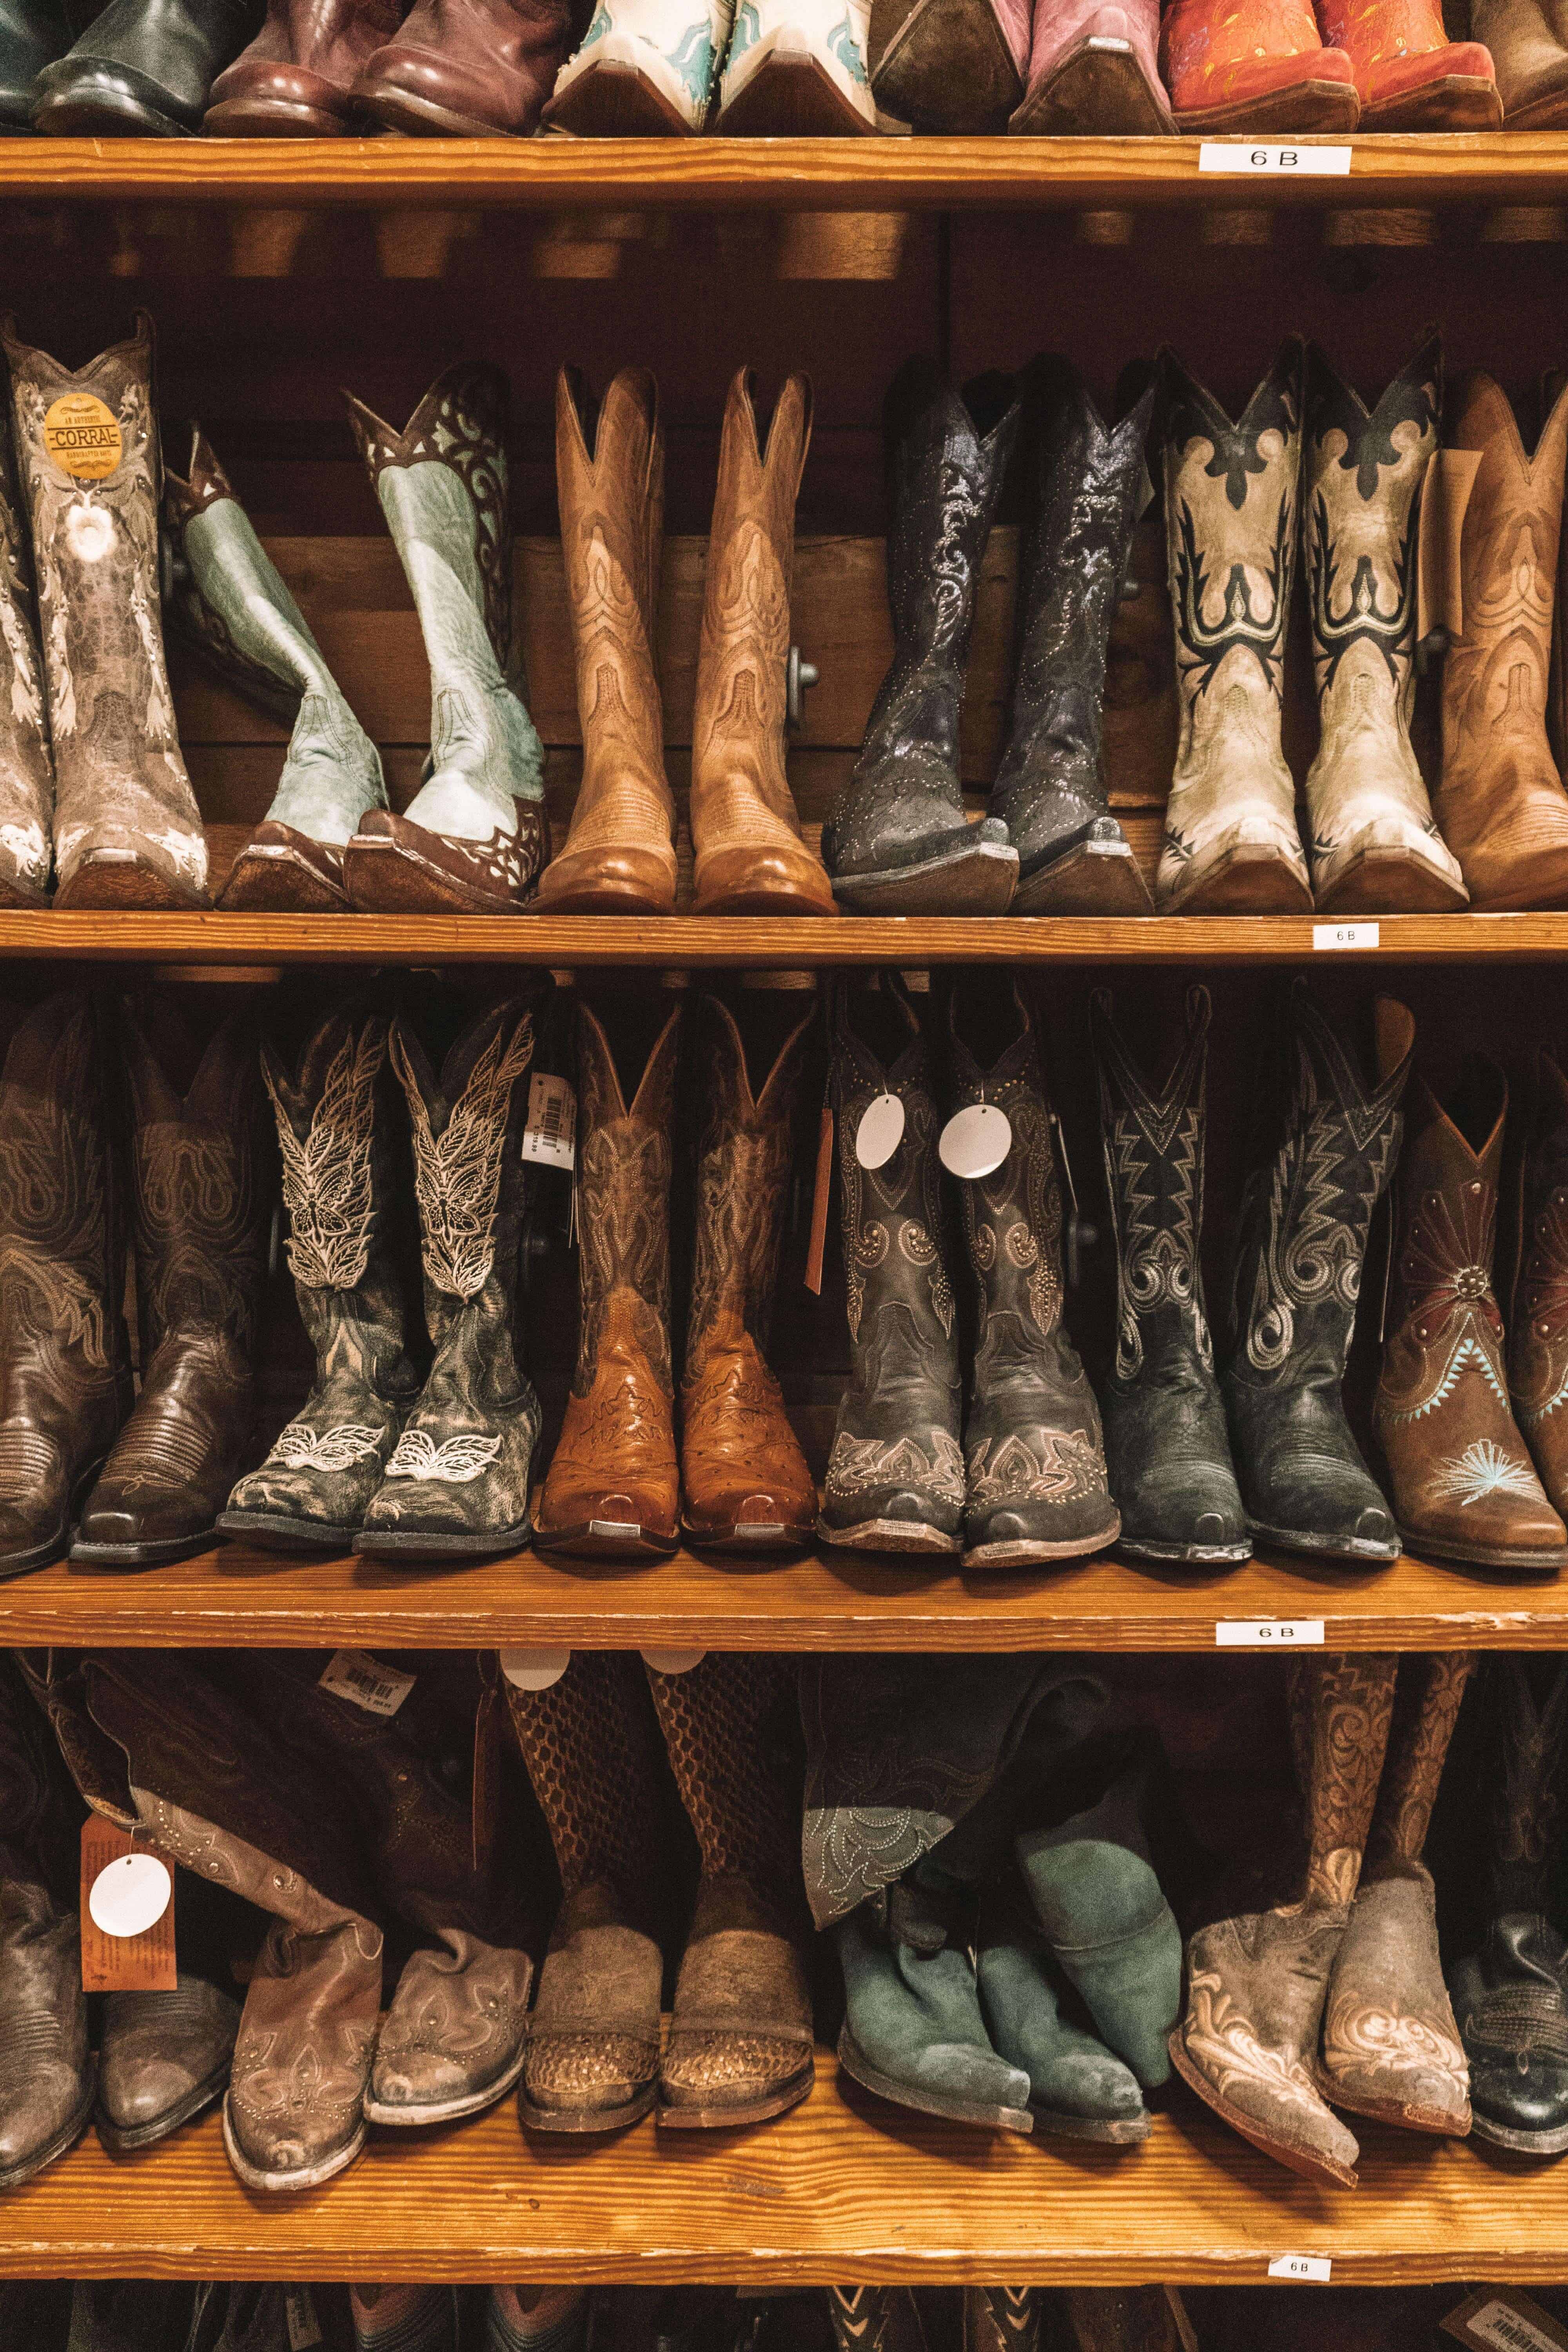 Allen's Boots | QUICK GUIDE TO AUSTIN, TEXAS IN A WEEKEND | The Republic of Rose